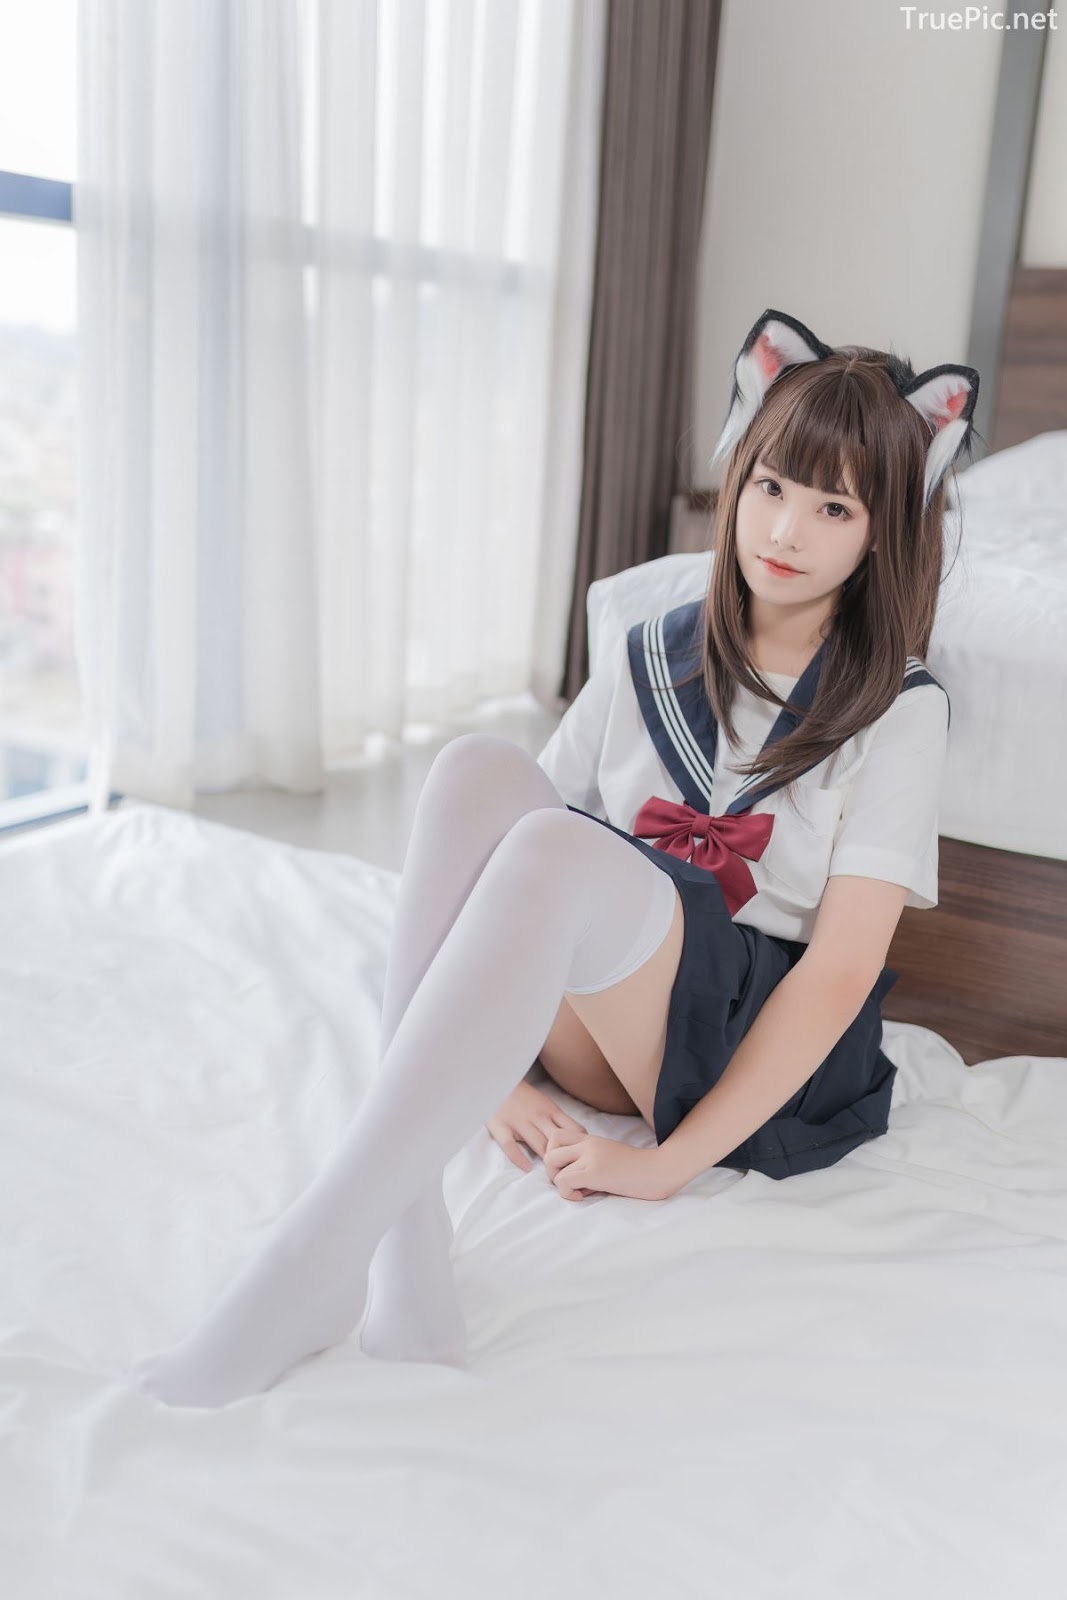 [MTCos] 喵糖映画 Vol.002 - Chinese model - Cosplay Japanese School Girl Student with Cat Hairband